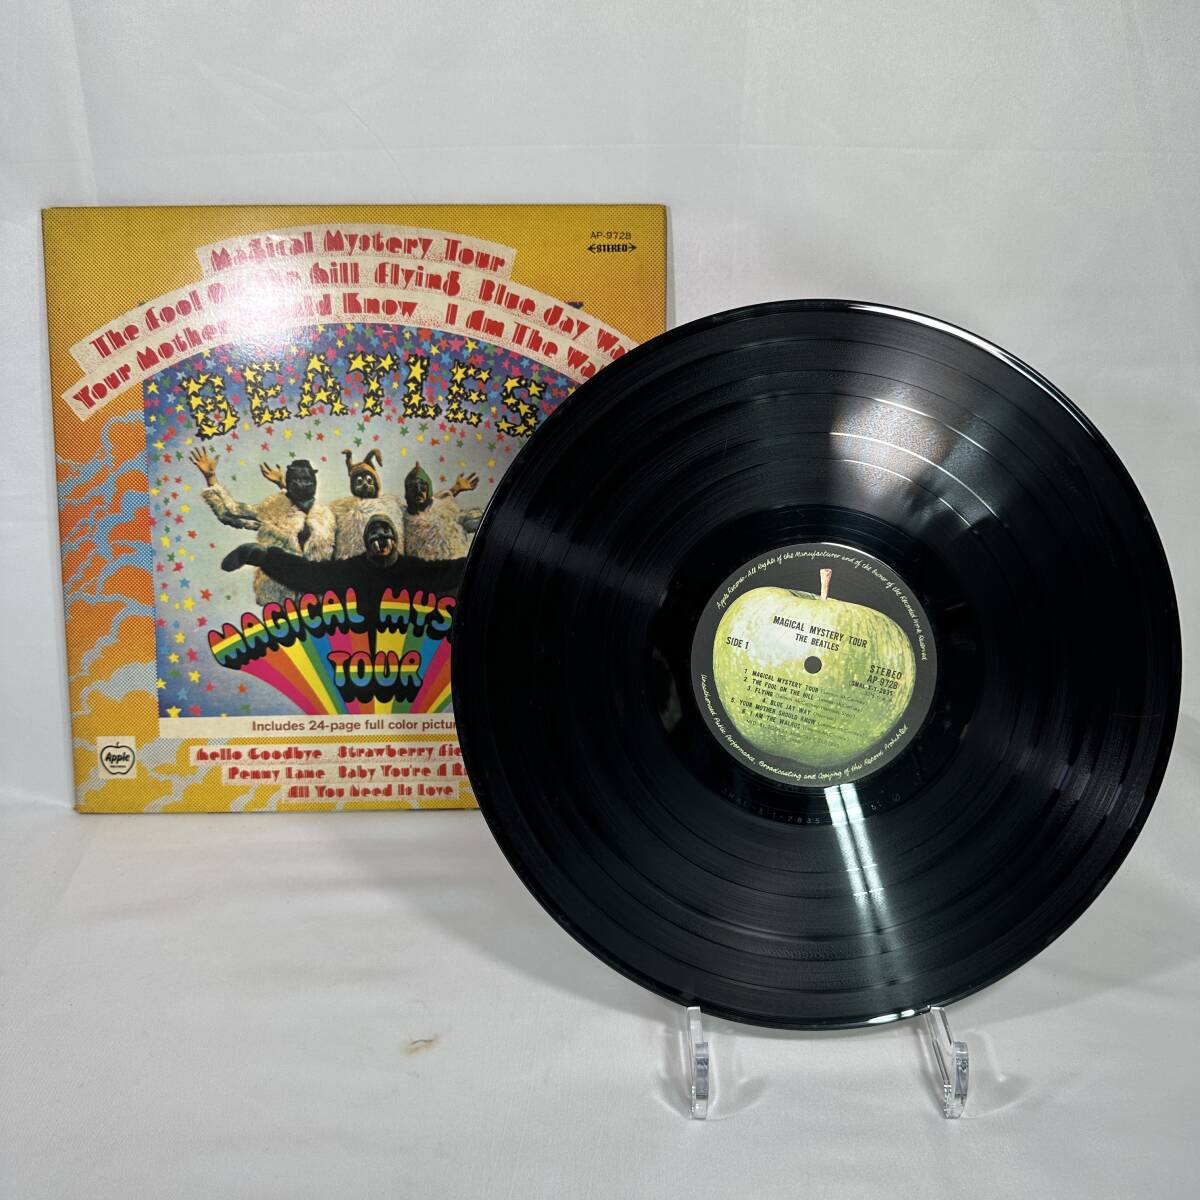 The Beatles Beatles Magical Mystery Tour Magical Mystery Tour LP Record Apple Records EAP-9030X (RR003)